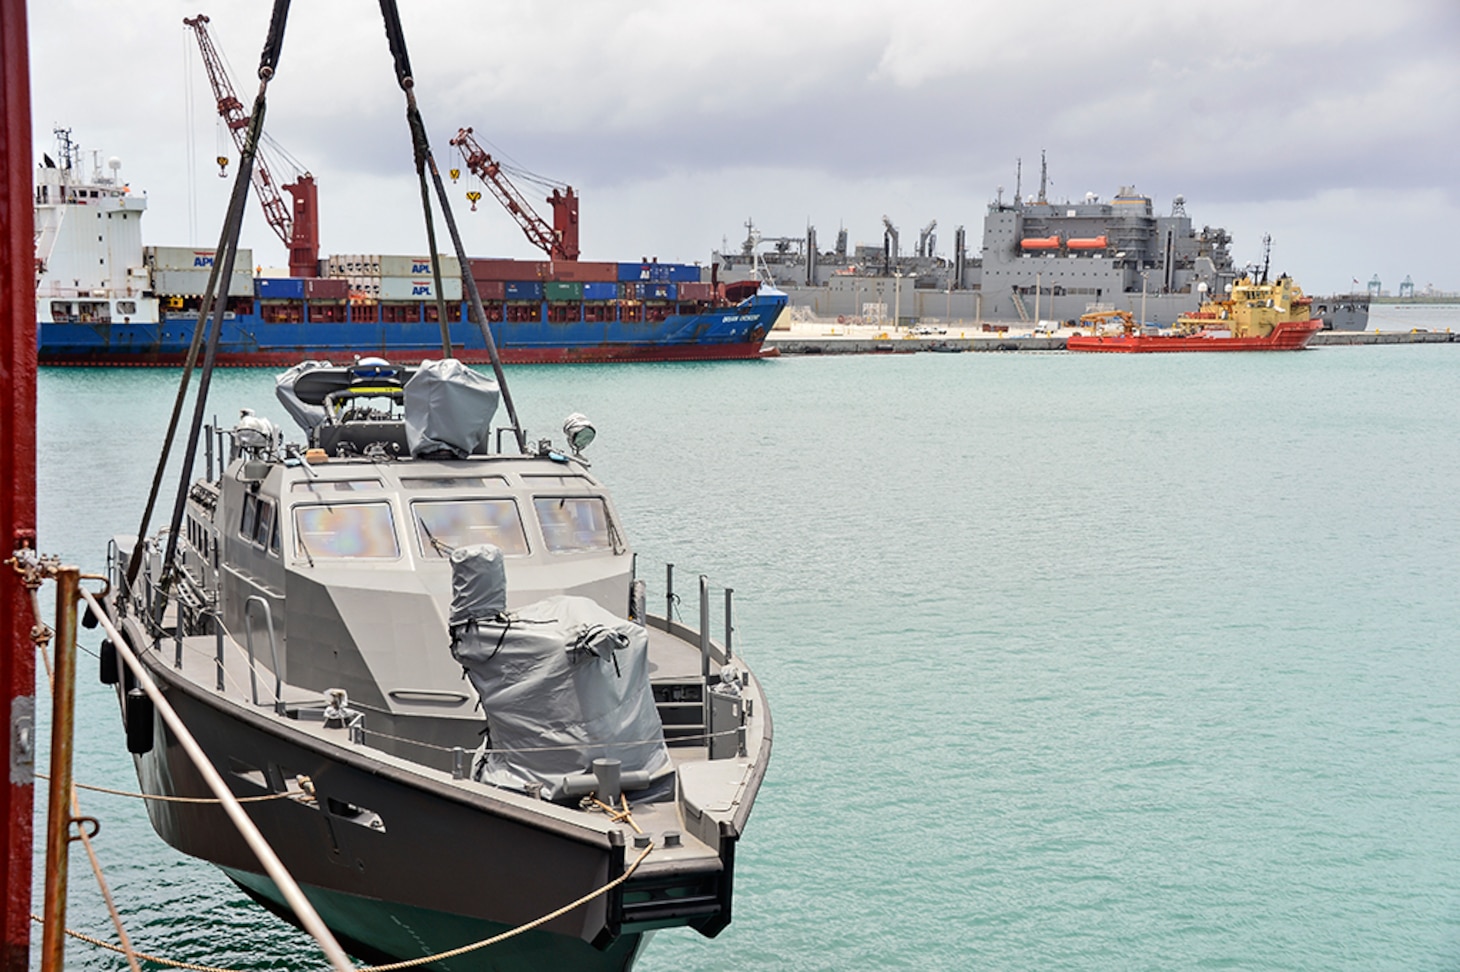 The Mark VI Patrol Boat, assigned to Coastal Riverine Group One, Detachment Guam (CRG-1 Det Guam) is offloaded at Naval Base Guam.  CRG-1 Det Guam is assigned to Commander, Task Force 75, the primary expeditionary task force responsible for the planning and execution of coastal riverine operations, explosive ordnance disposal, diving engineering and construction, and underwater construction in the U.S. 7th fleet area of operations. 